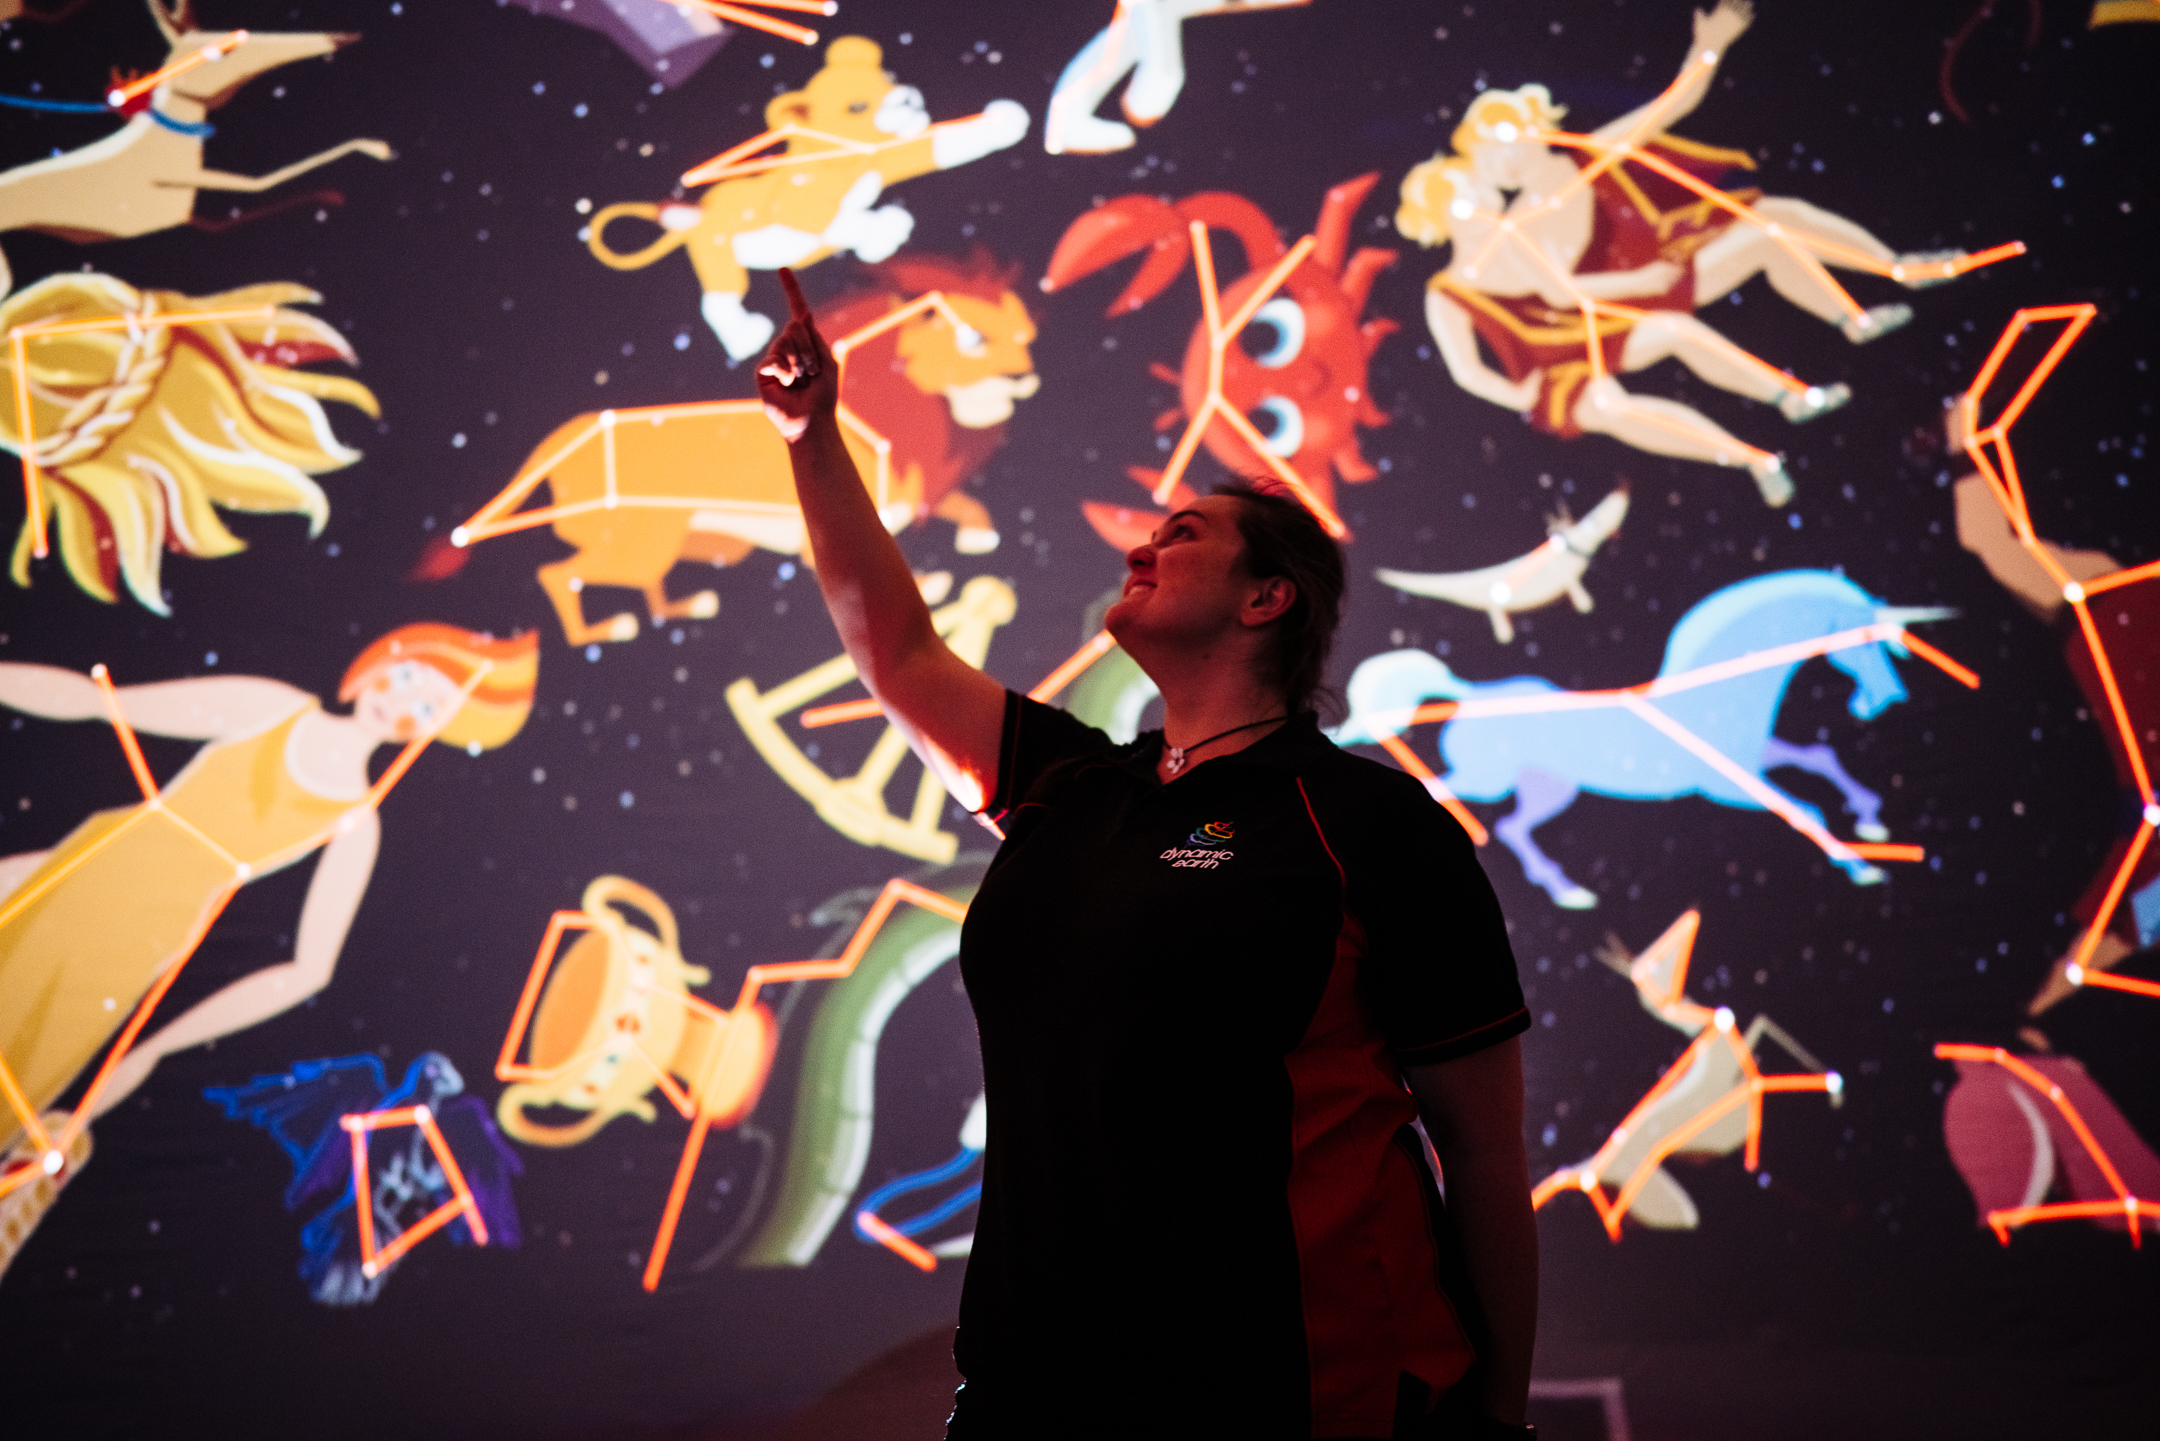 Shetland to the Stars! Free family fun day in partnership with Dynamic Earth